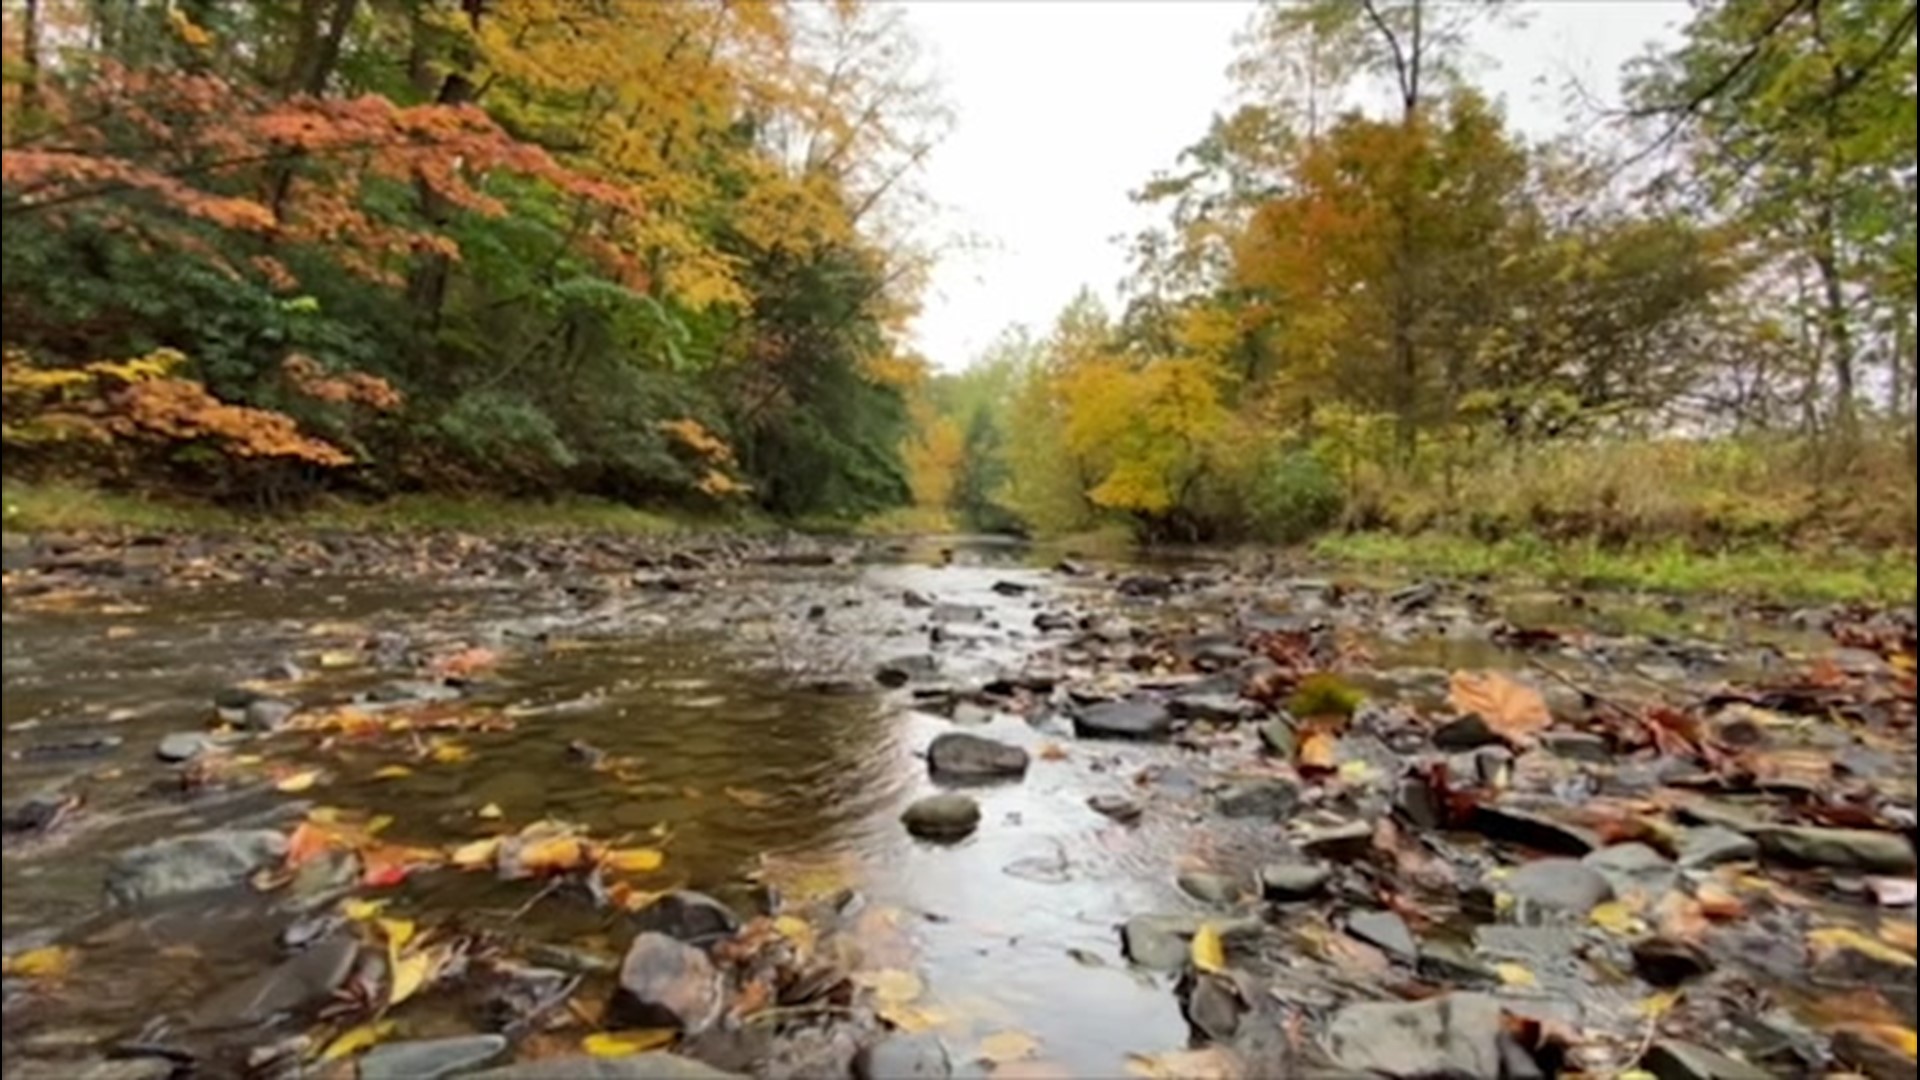 Leaves changing colors, a cloudy day and a babbling creek - the perfect combination for an autumn day in Julian, Pennsylvania.